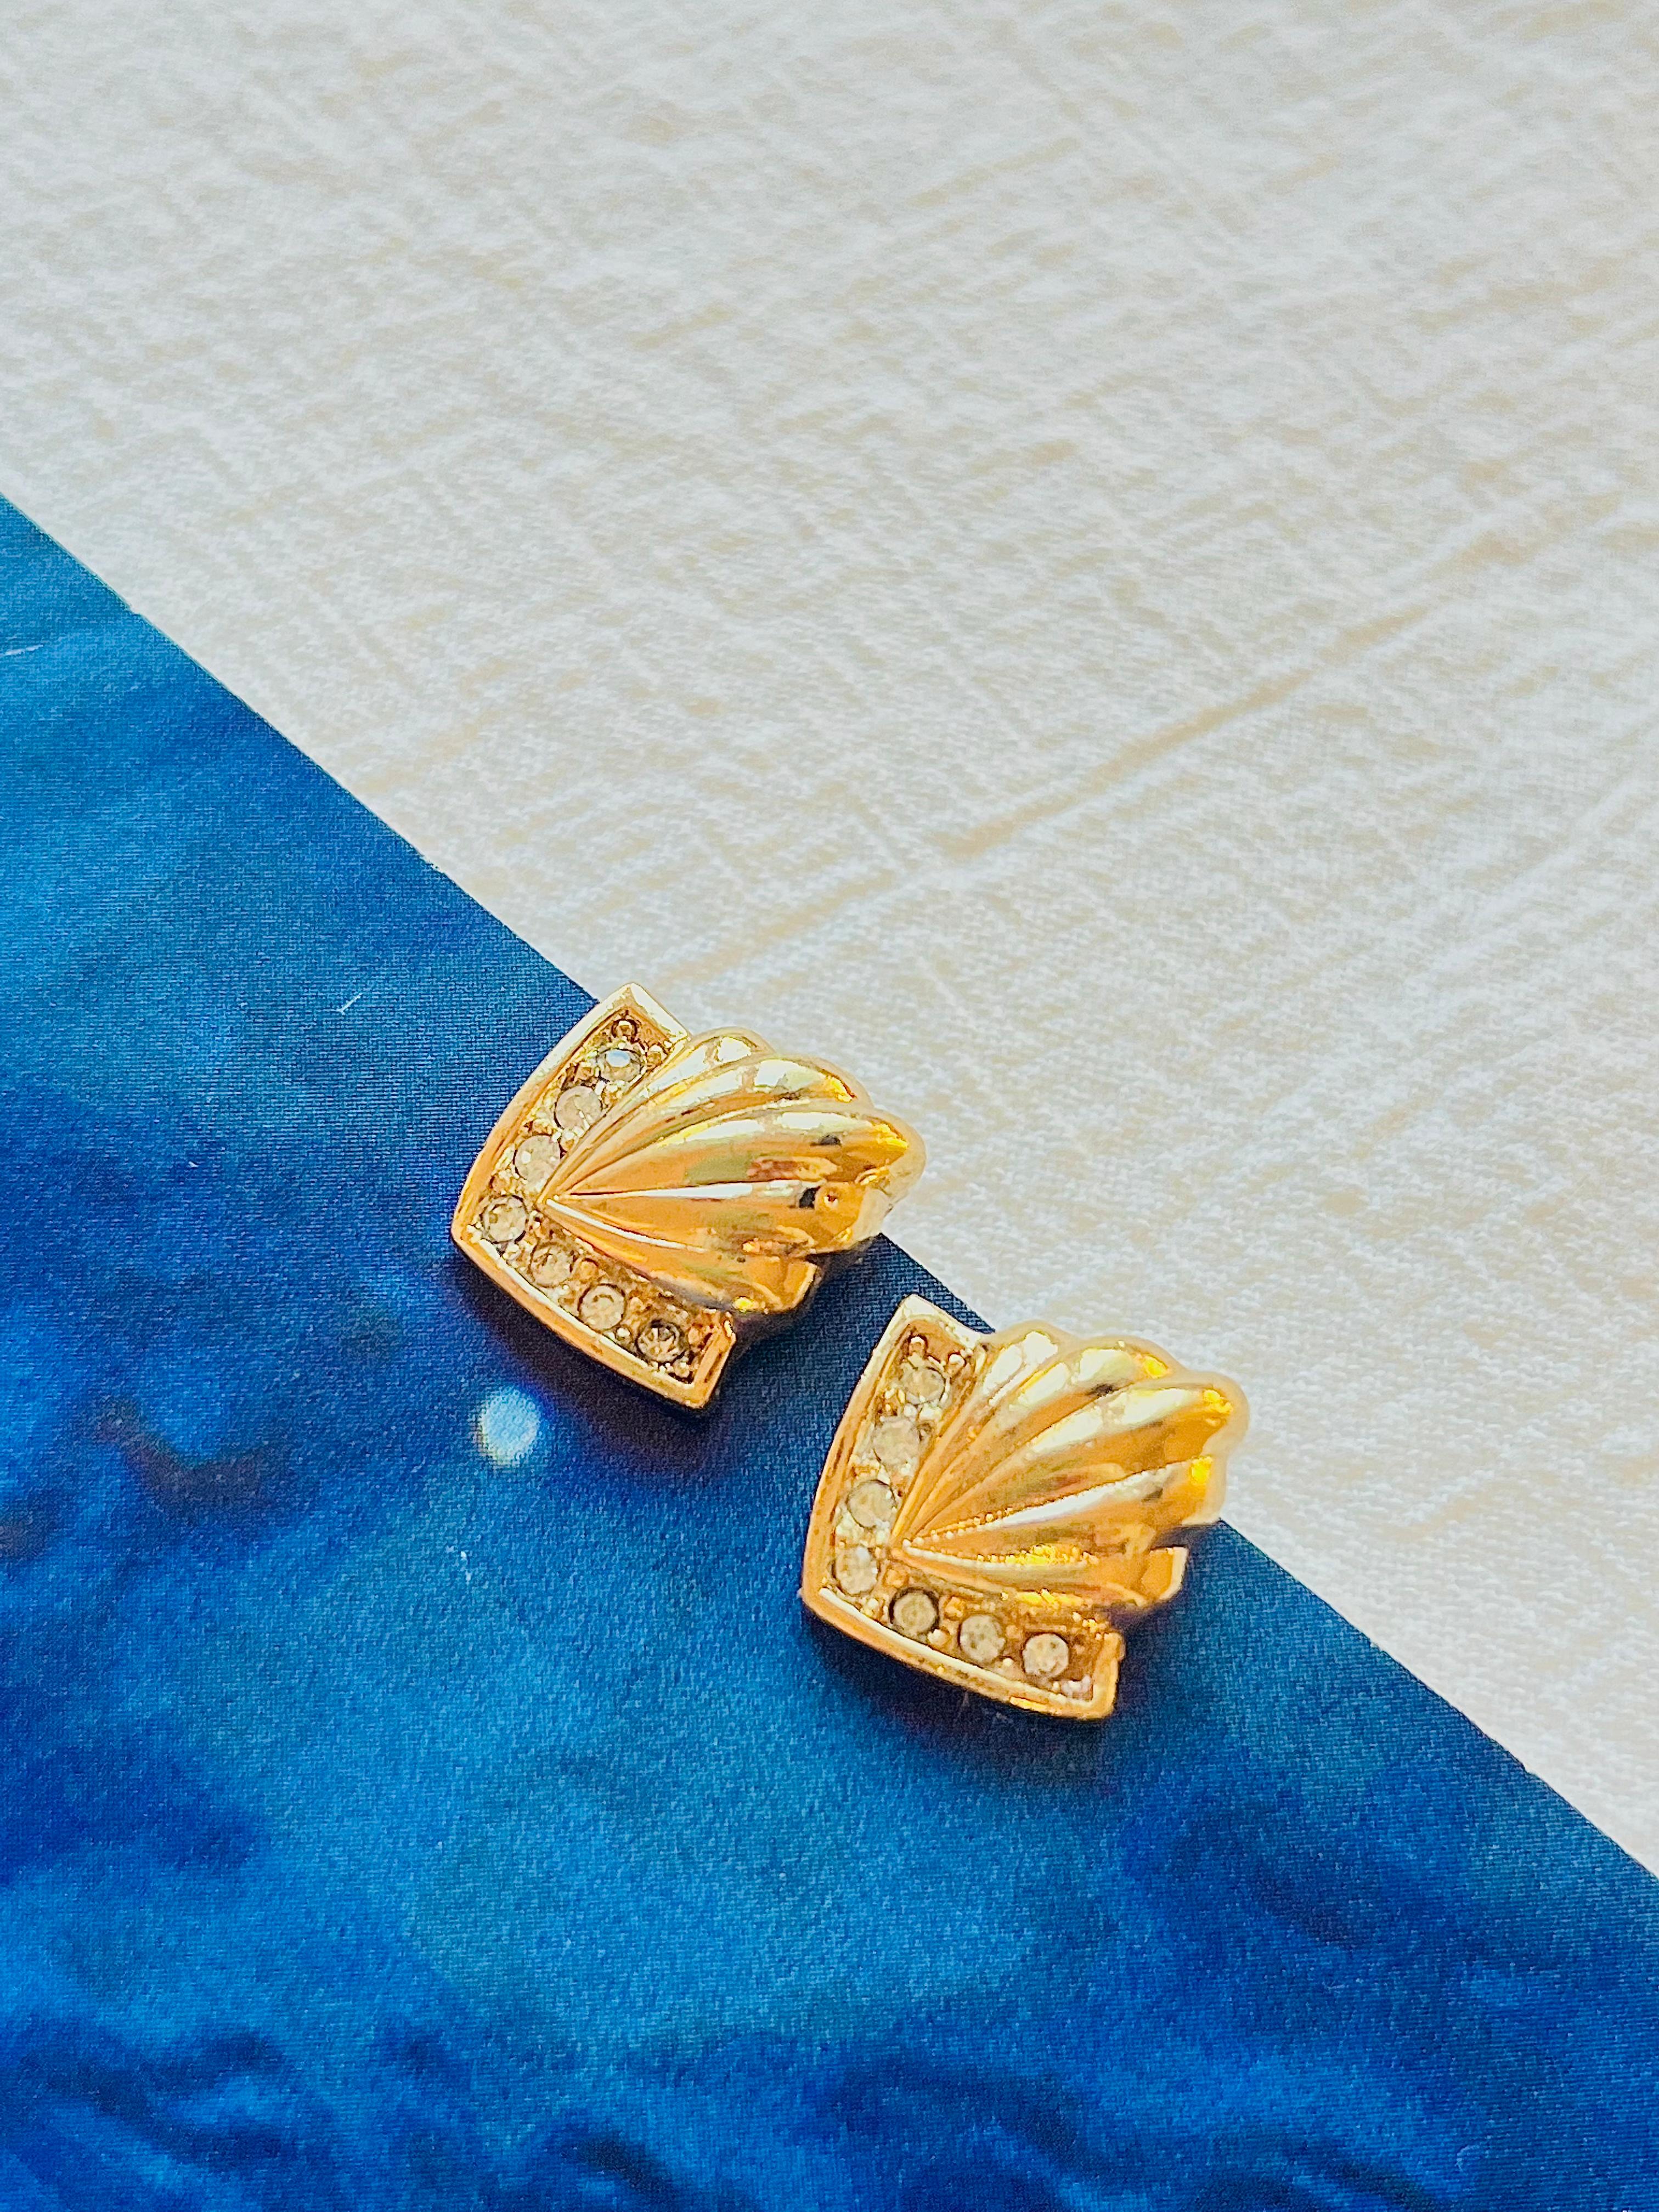 Very good condition. Light scratches, barely noticeable. 100% genuine.

A very beautiful pair of rhinestone clip on earrings by Chr. DIOR, signed at the back.

Size: 1.5*1.5 cm.

Weight: 2.0 g/each.

_ _ _

Great for everyday wear. Come with velvet